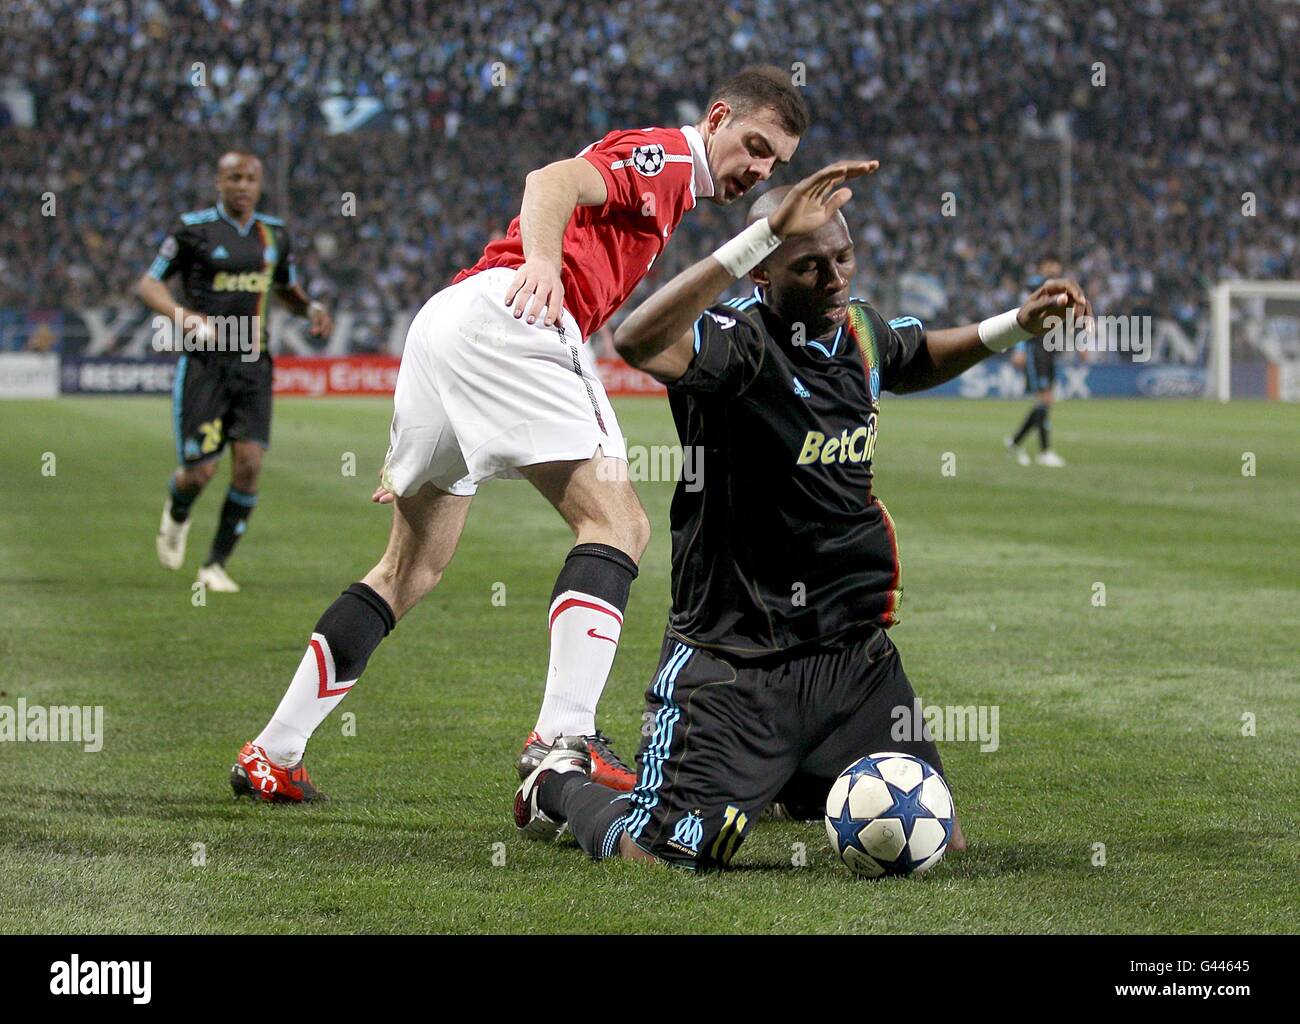 Soccer - UEFA Champions League - Round of 16 - First Leg - Olympique de Marseille v Manchester United - Stade Velodrome. Manchester United's Darron Gibson (left) challenges Olympique de Marseille's Stephane M'Bia (right) Stock Photo